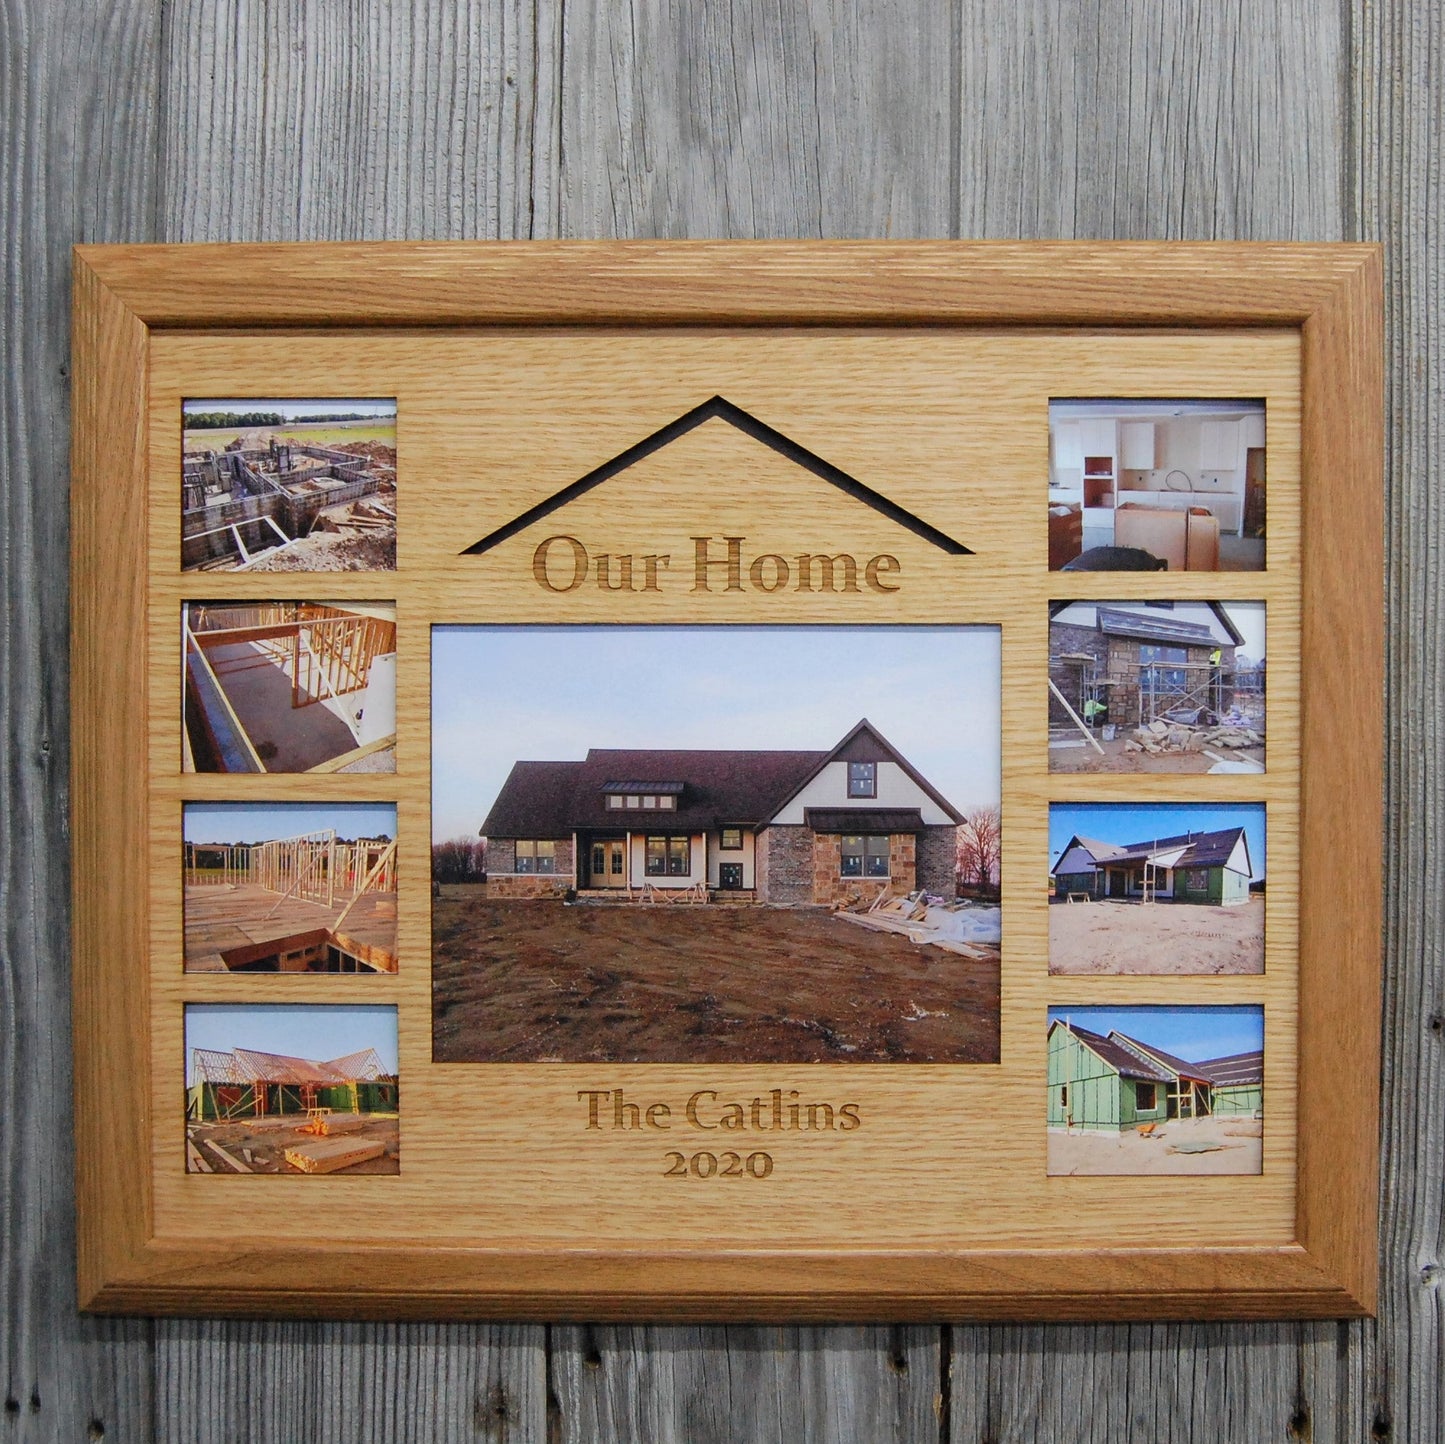 Our Home Picture Frame - 16x20 Frame Holds Multiple Photos - Legacy Images - Picture Frames